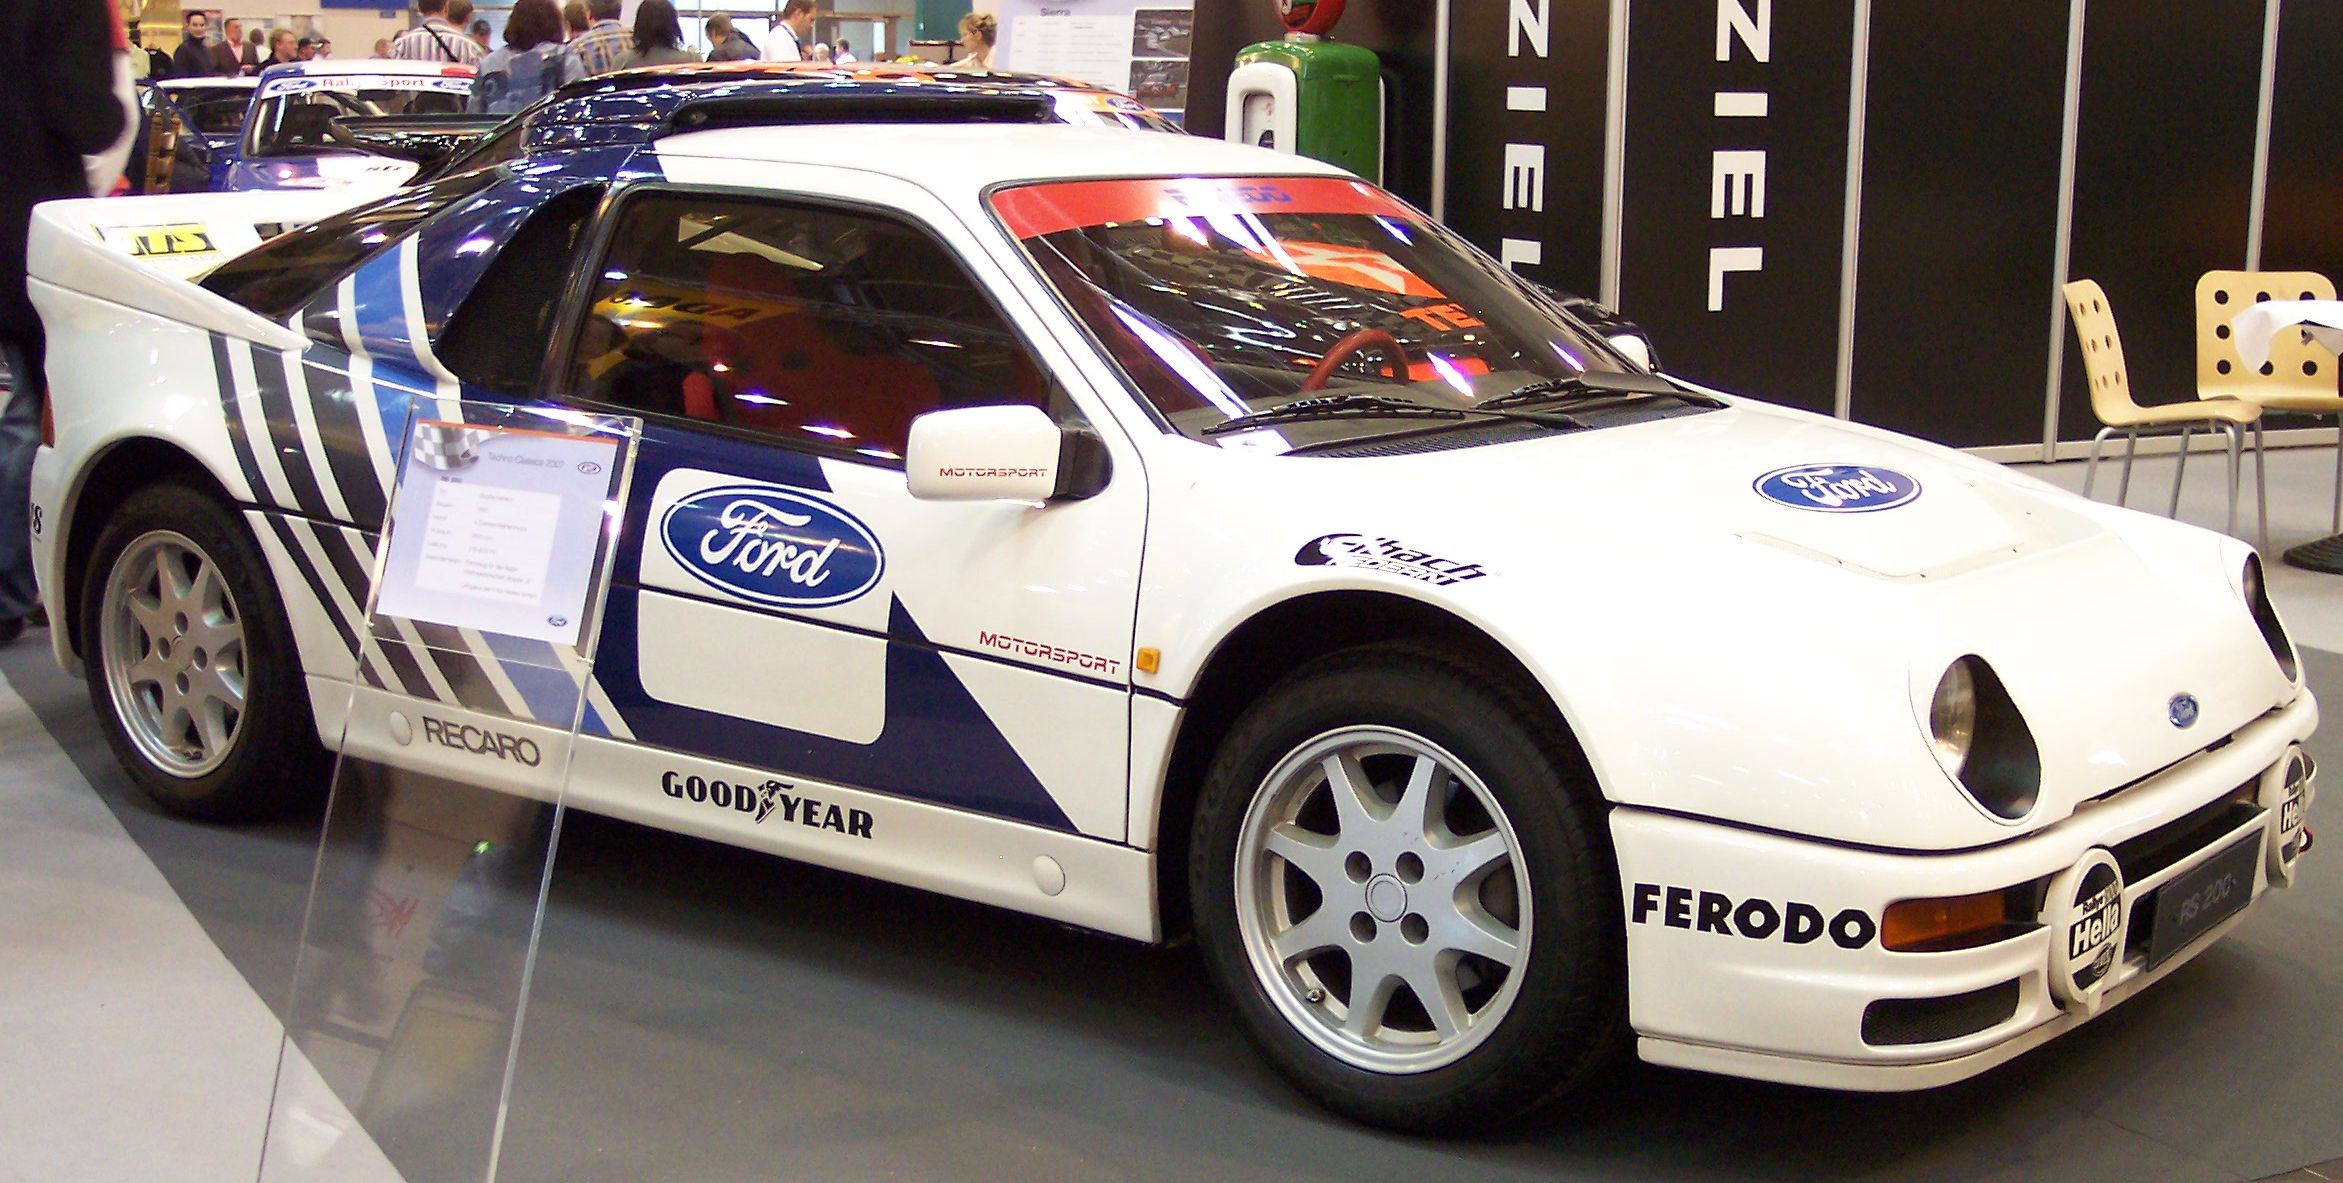 Ford RS 200